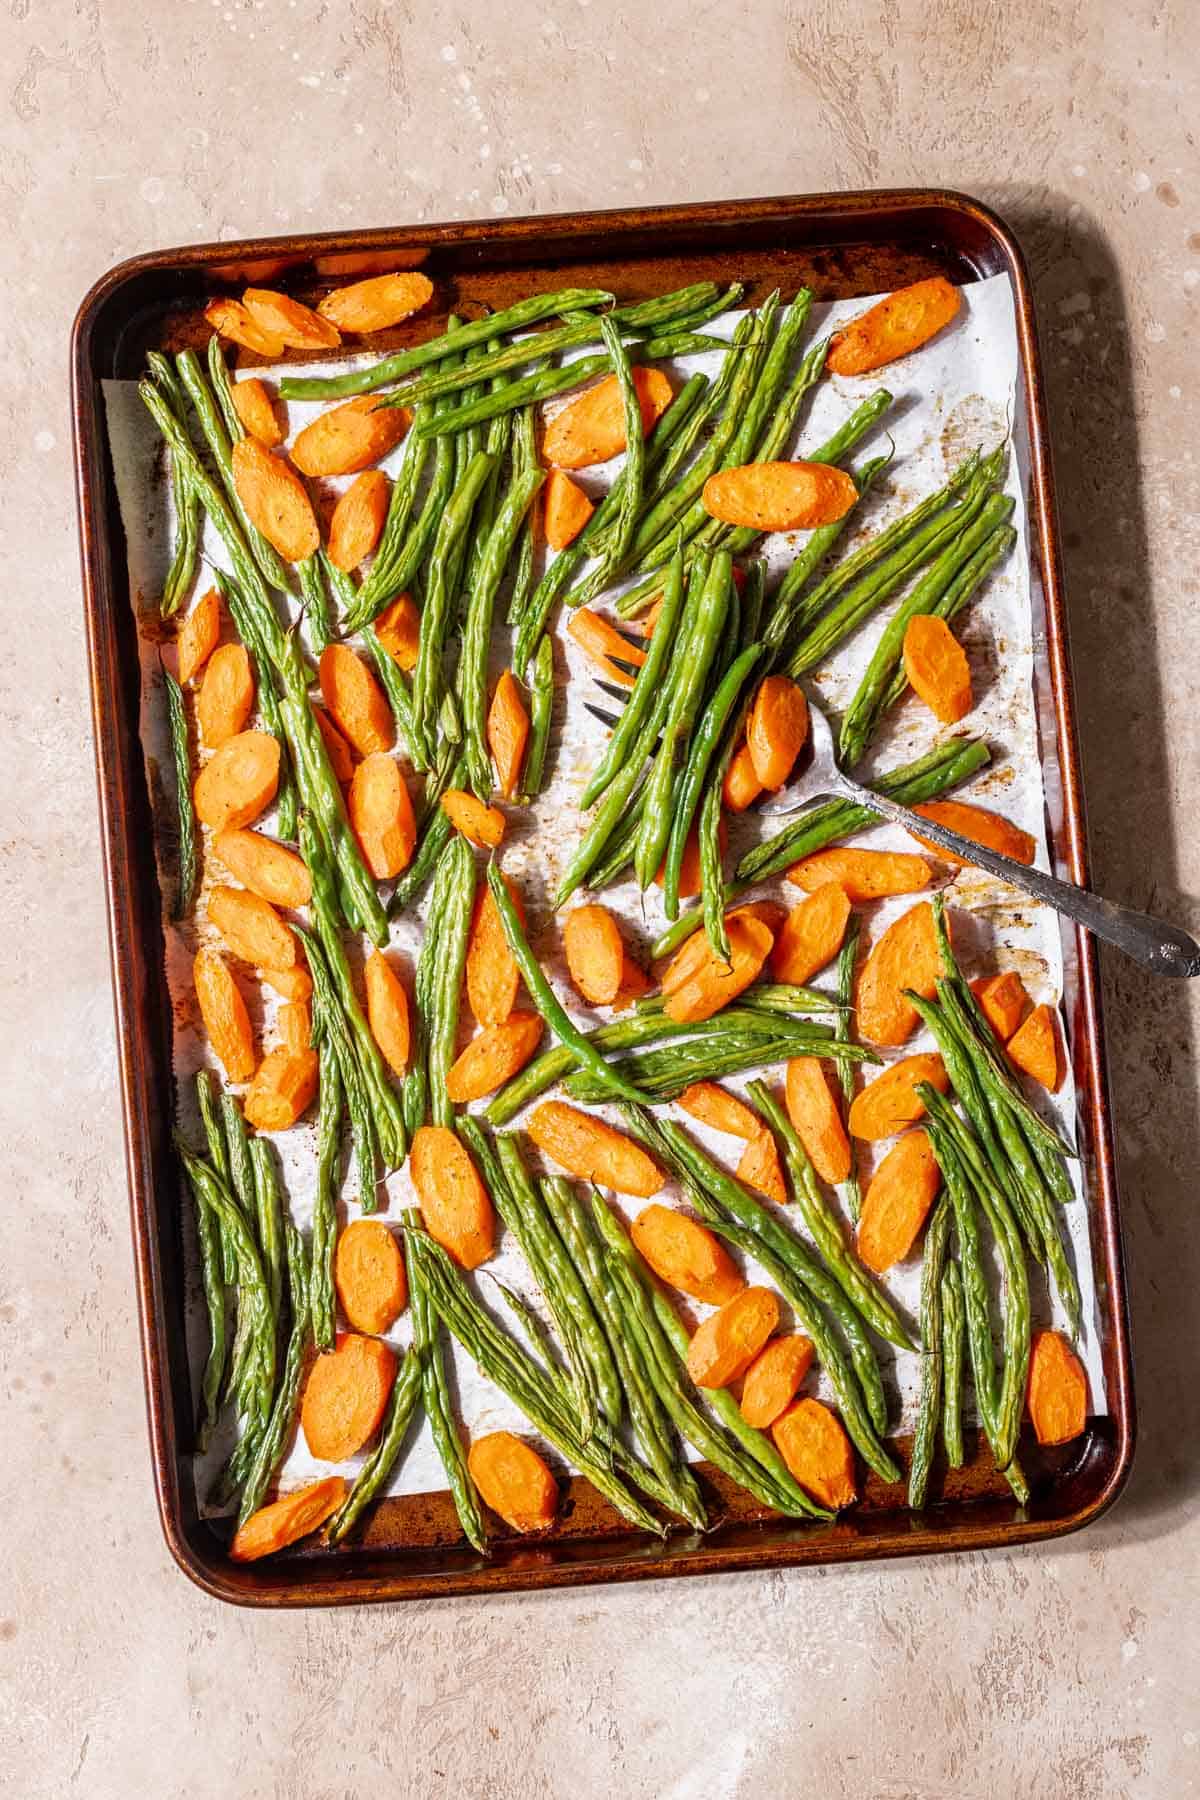 Roasted green beans and carrots on a baking sheet after roasting.